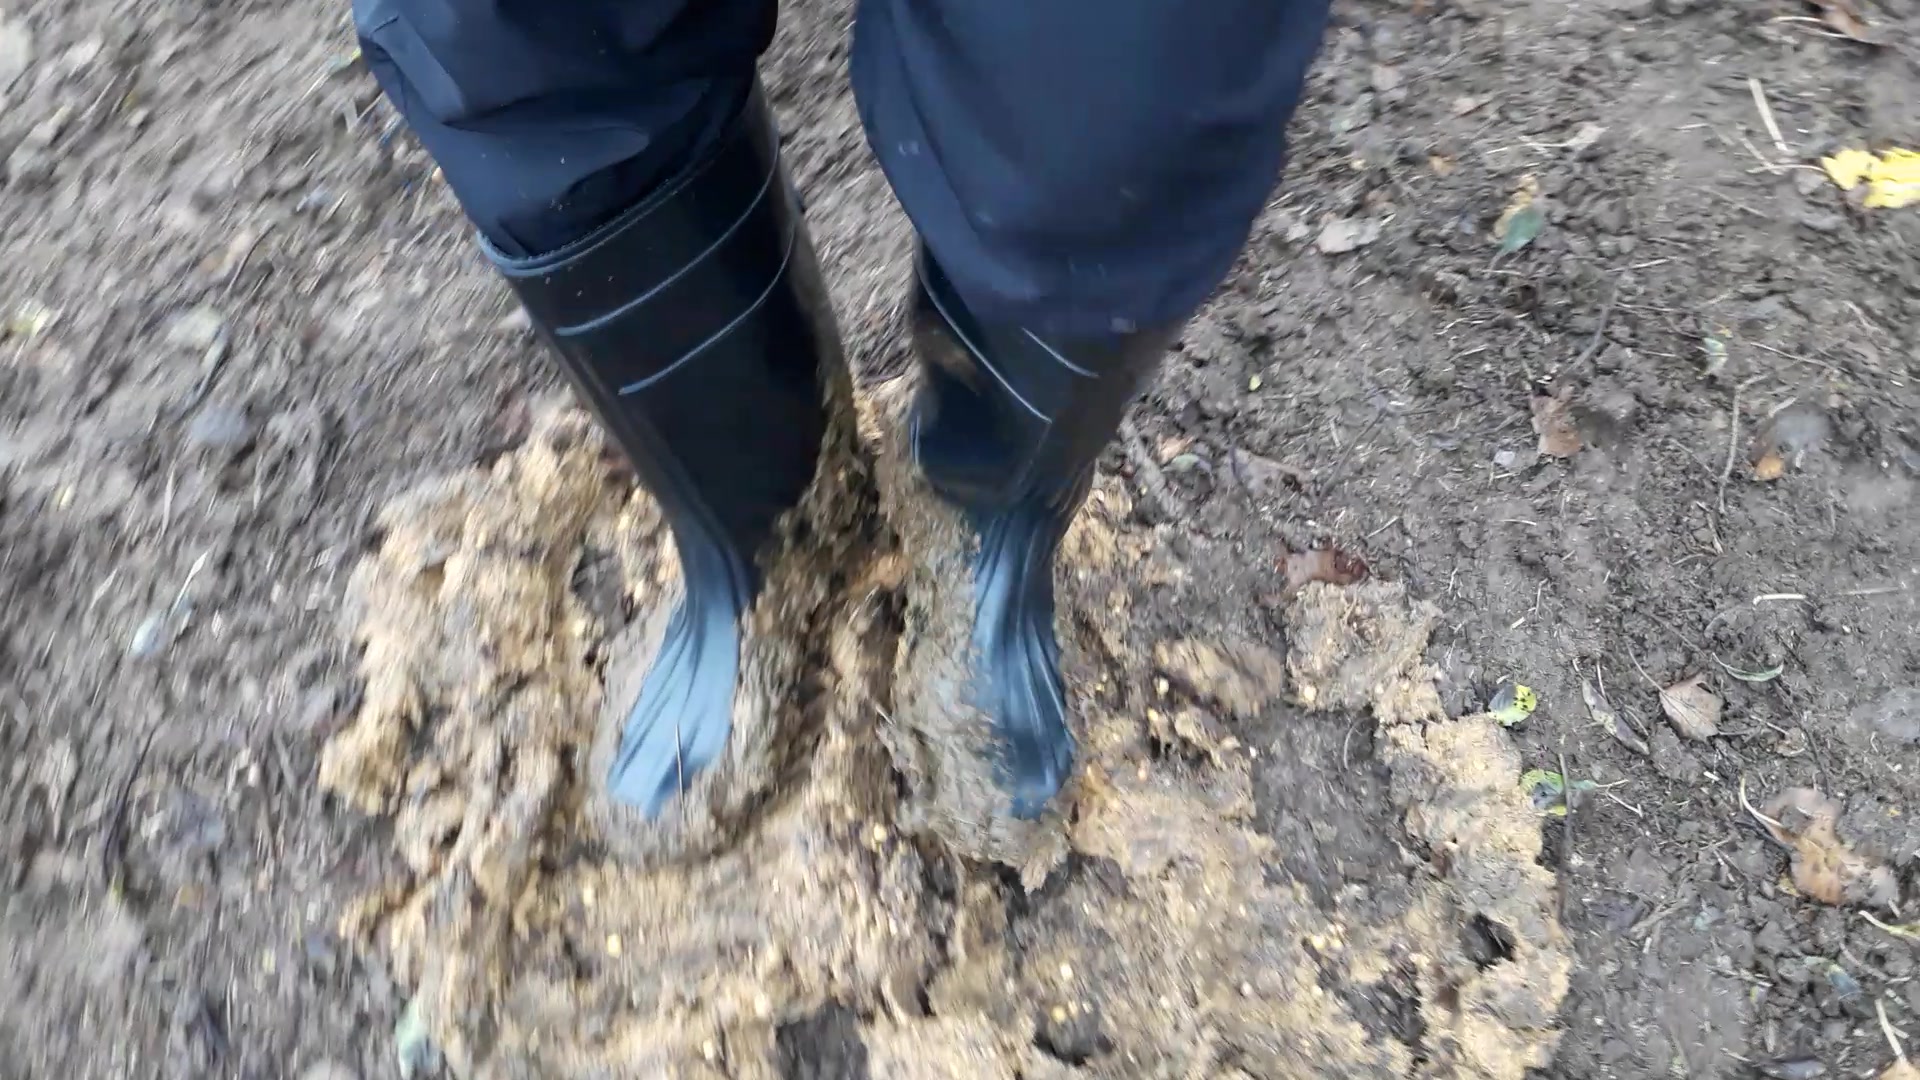 Rubber boots vs cowshit - video 16